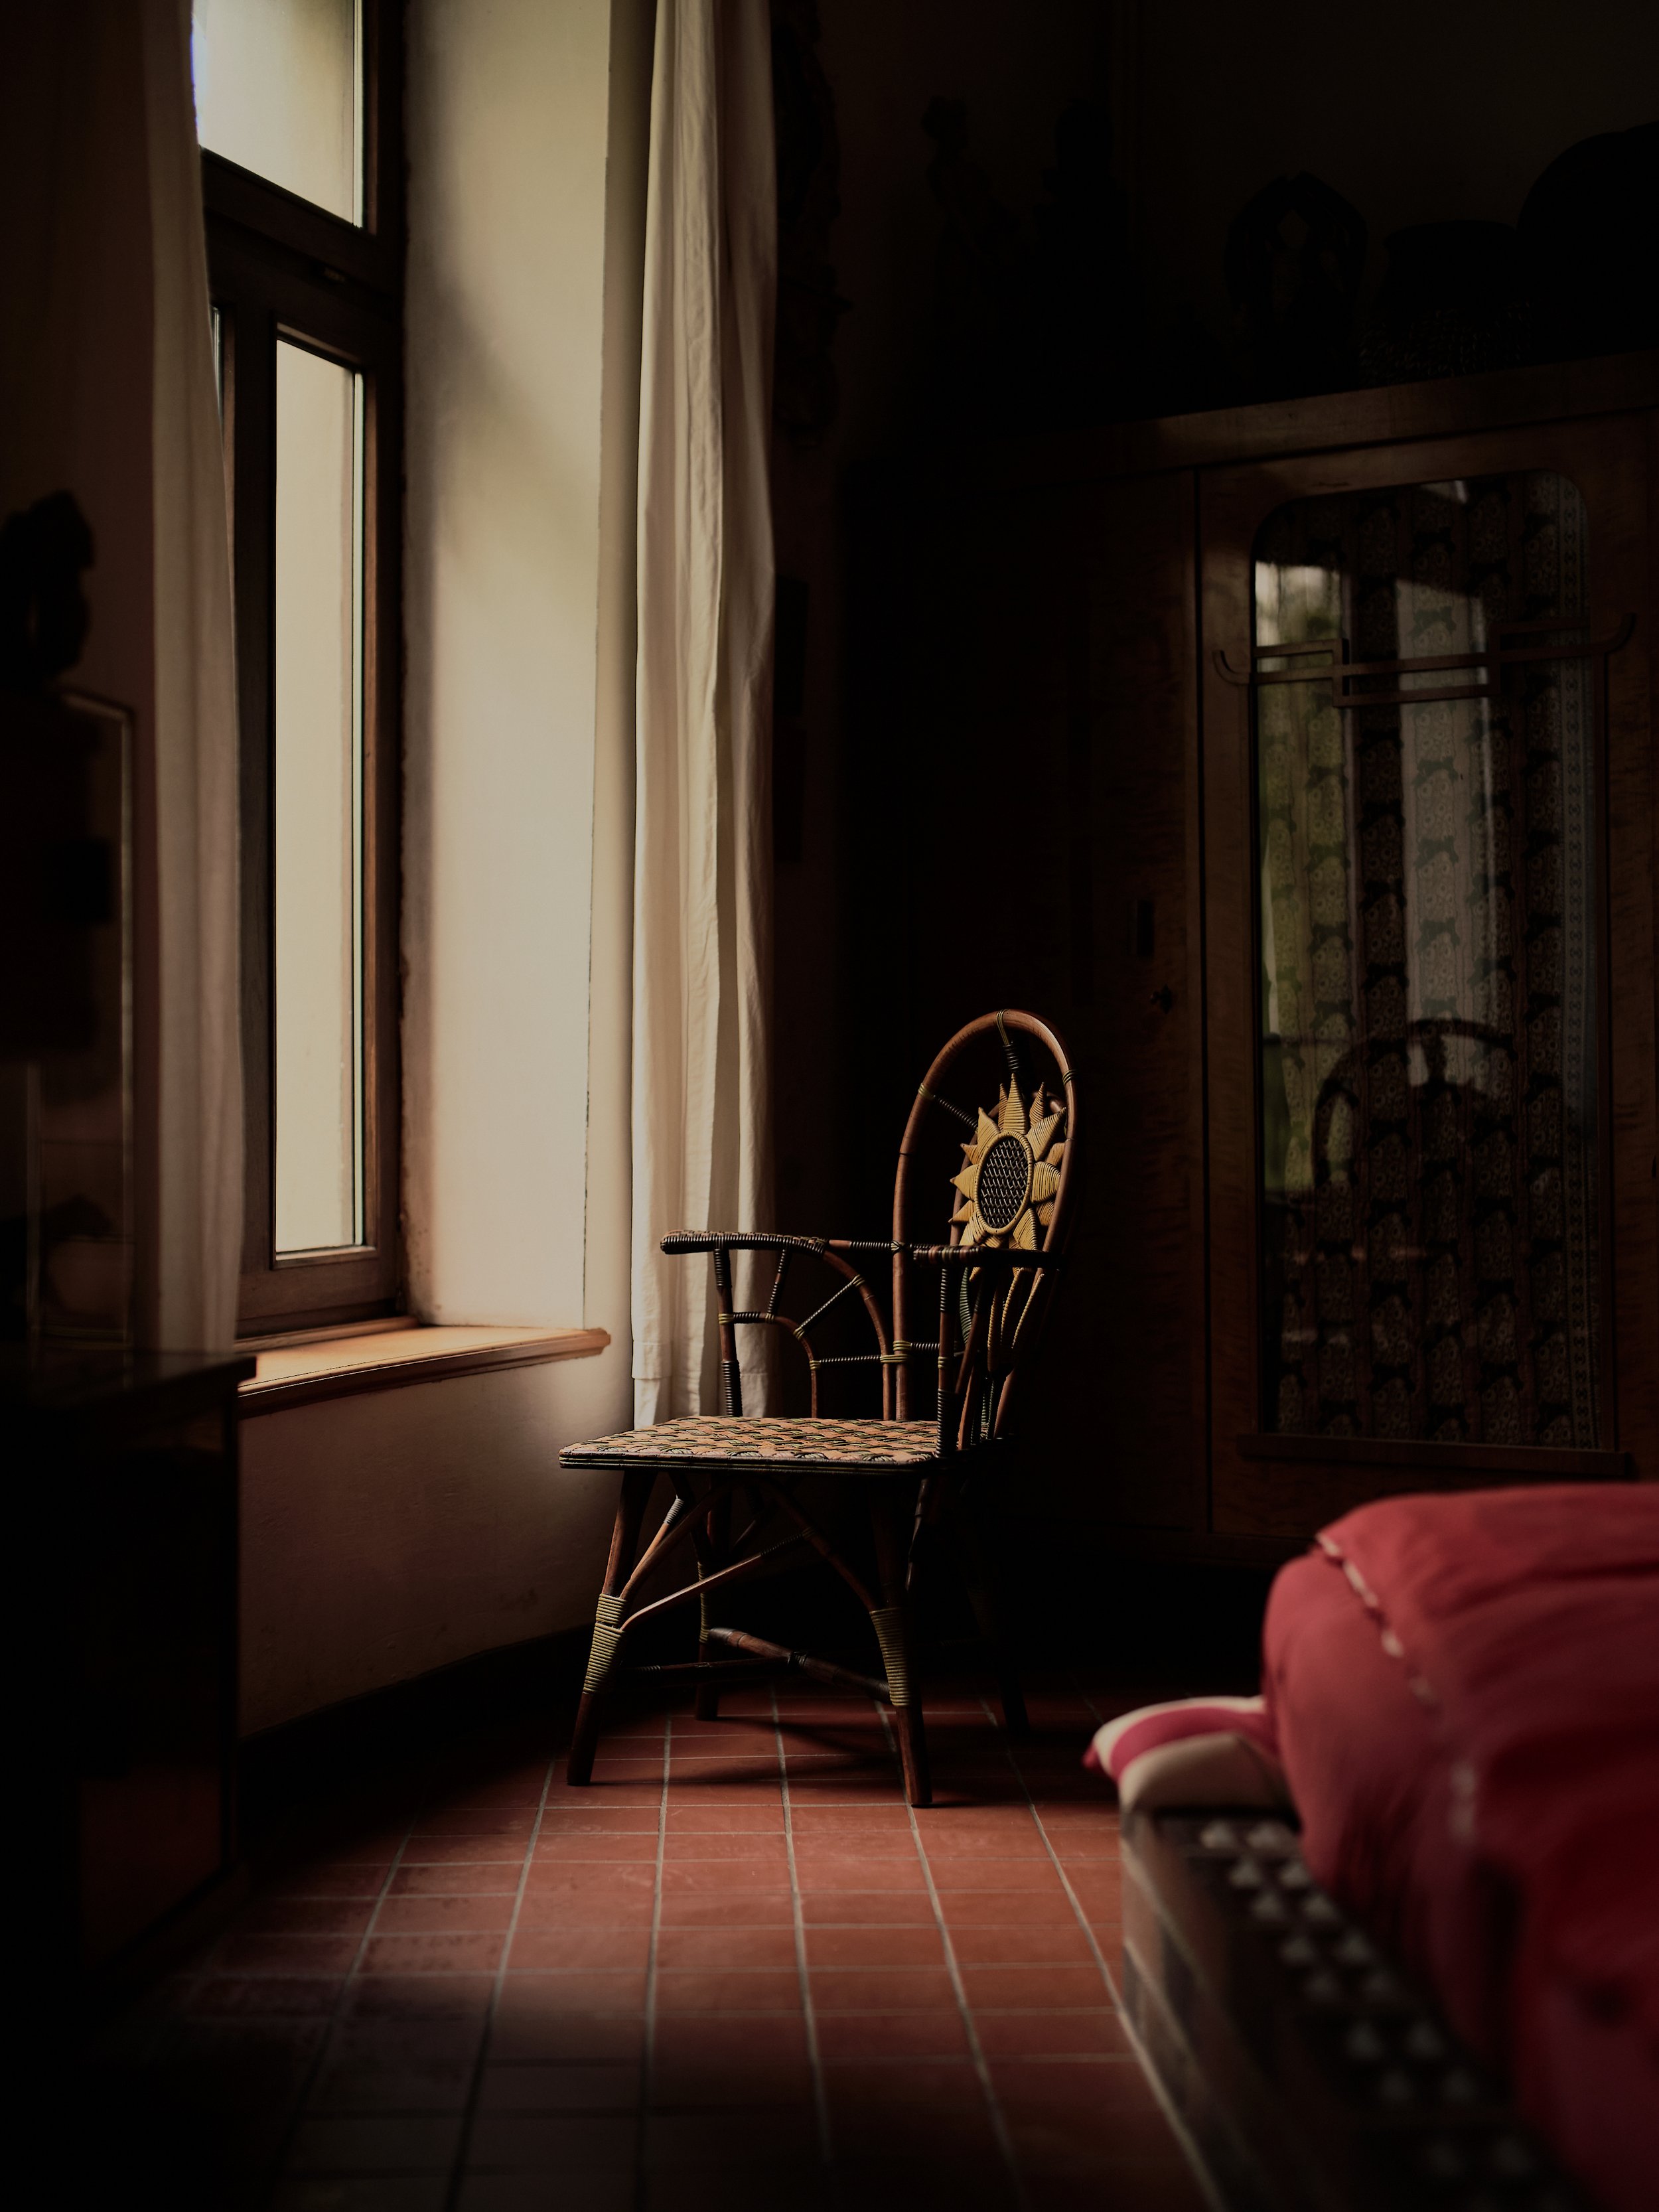  A chair in the bedroom on the first floor.  